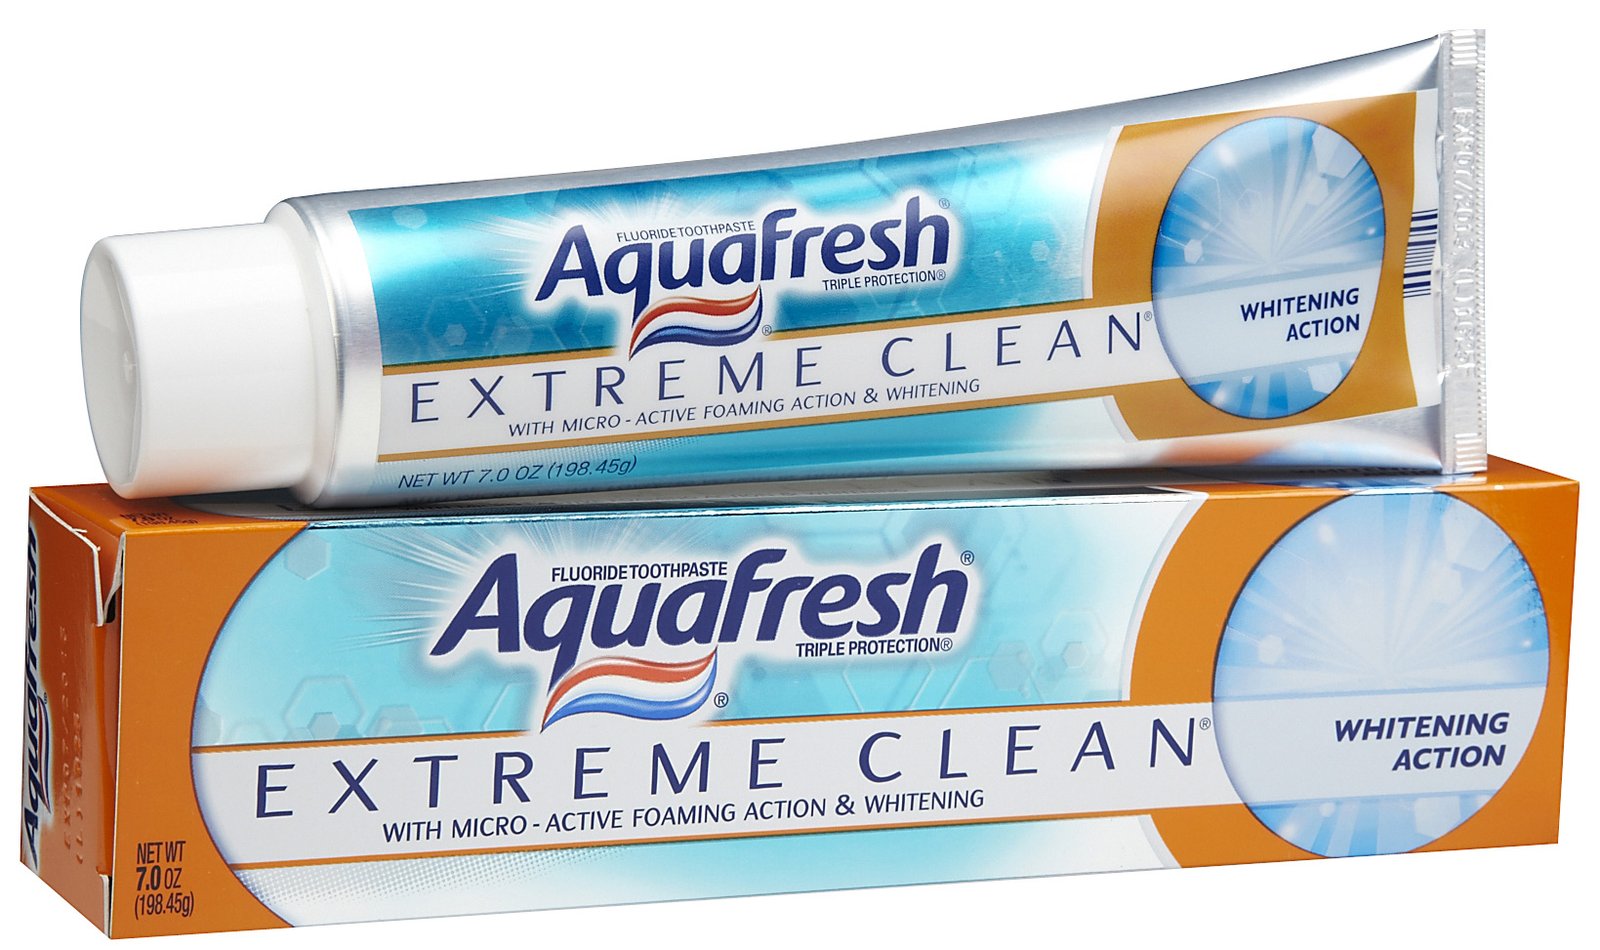 New Red Plum Coupons for Aquafresh and Colace!